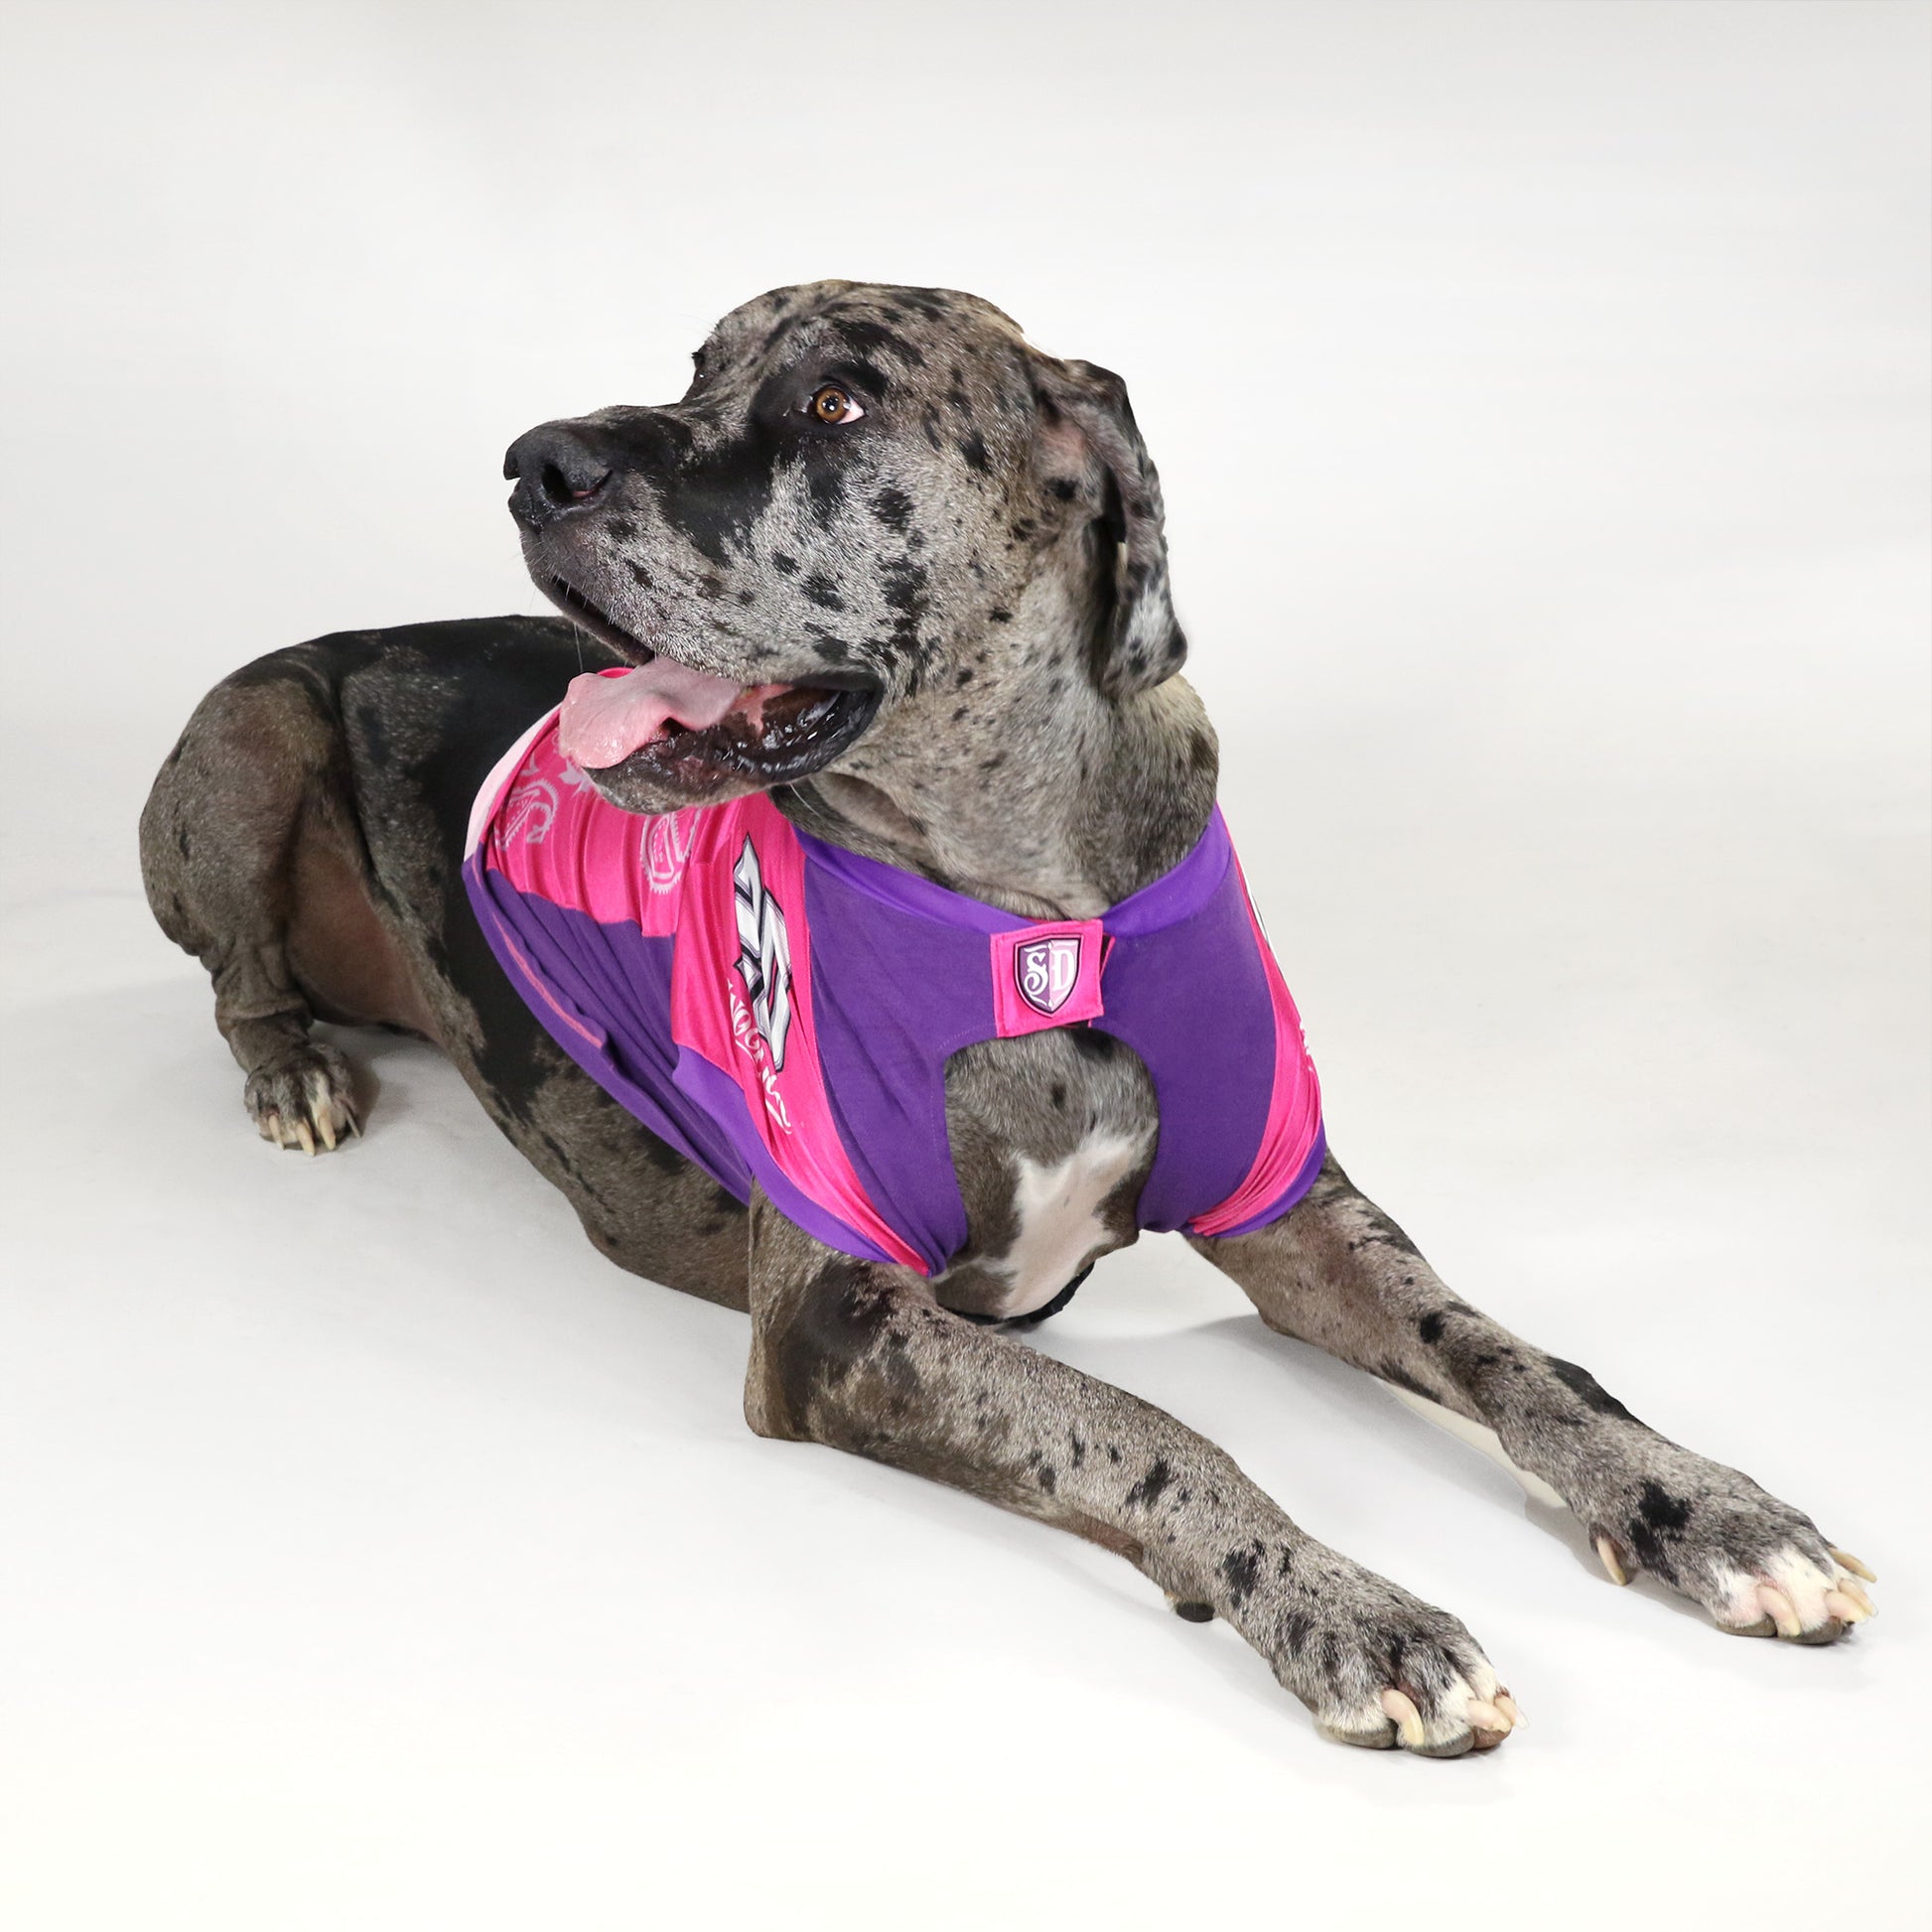 Rookie the Great Dane wearing the Boss Lady Deluxe Pet Jersey in size Big.